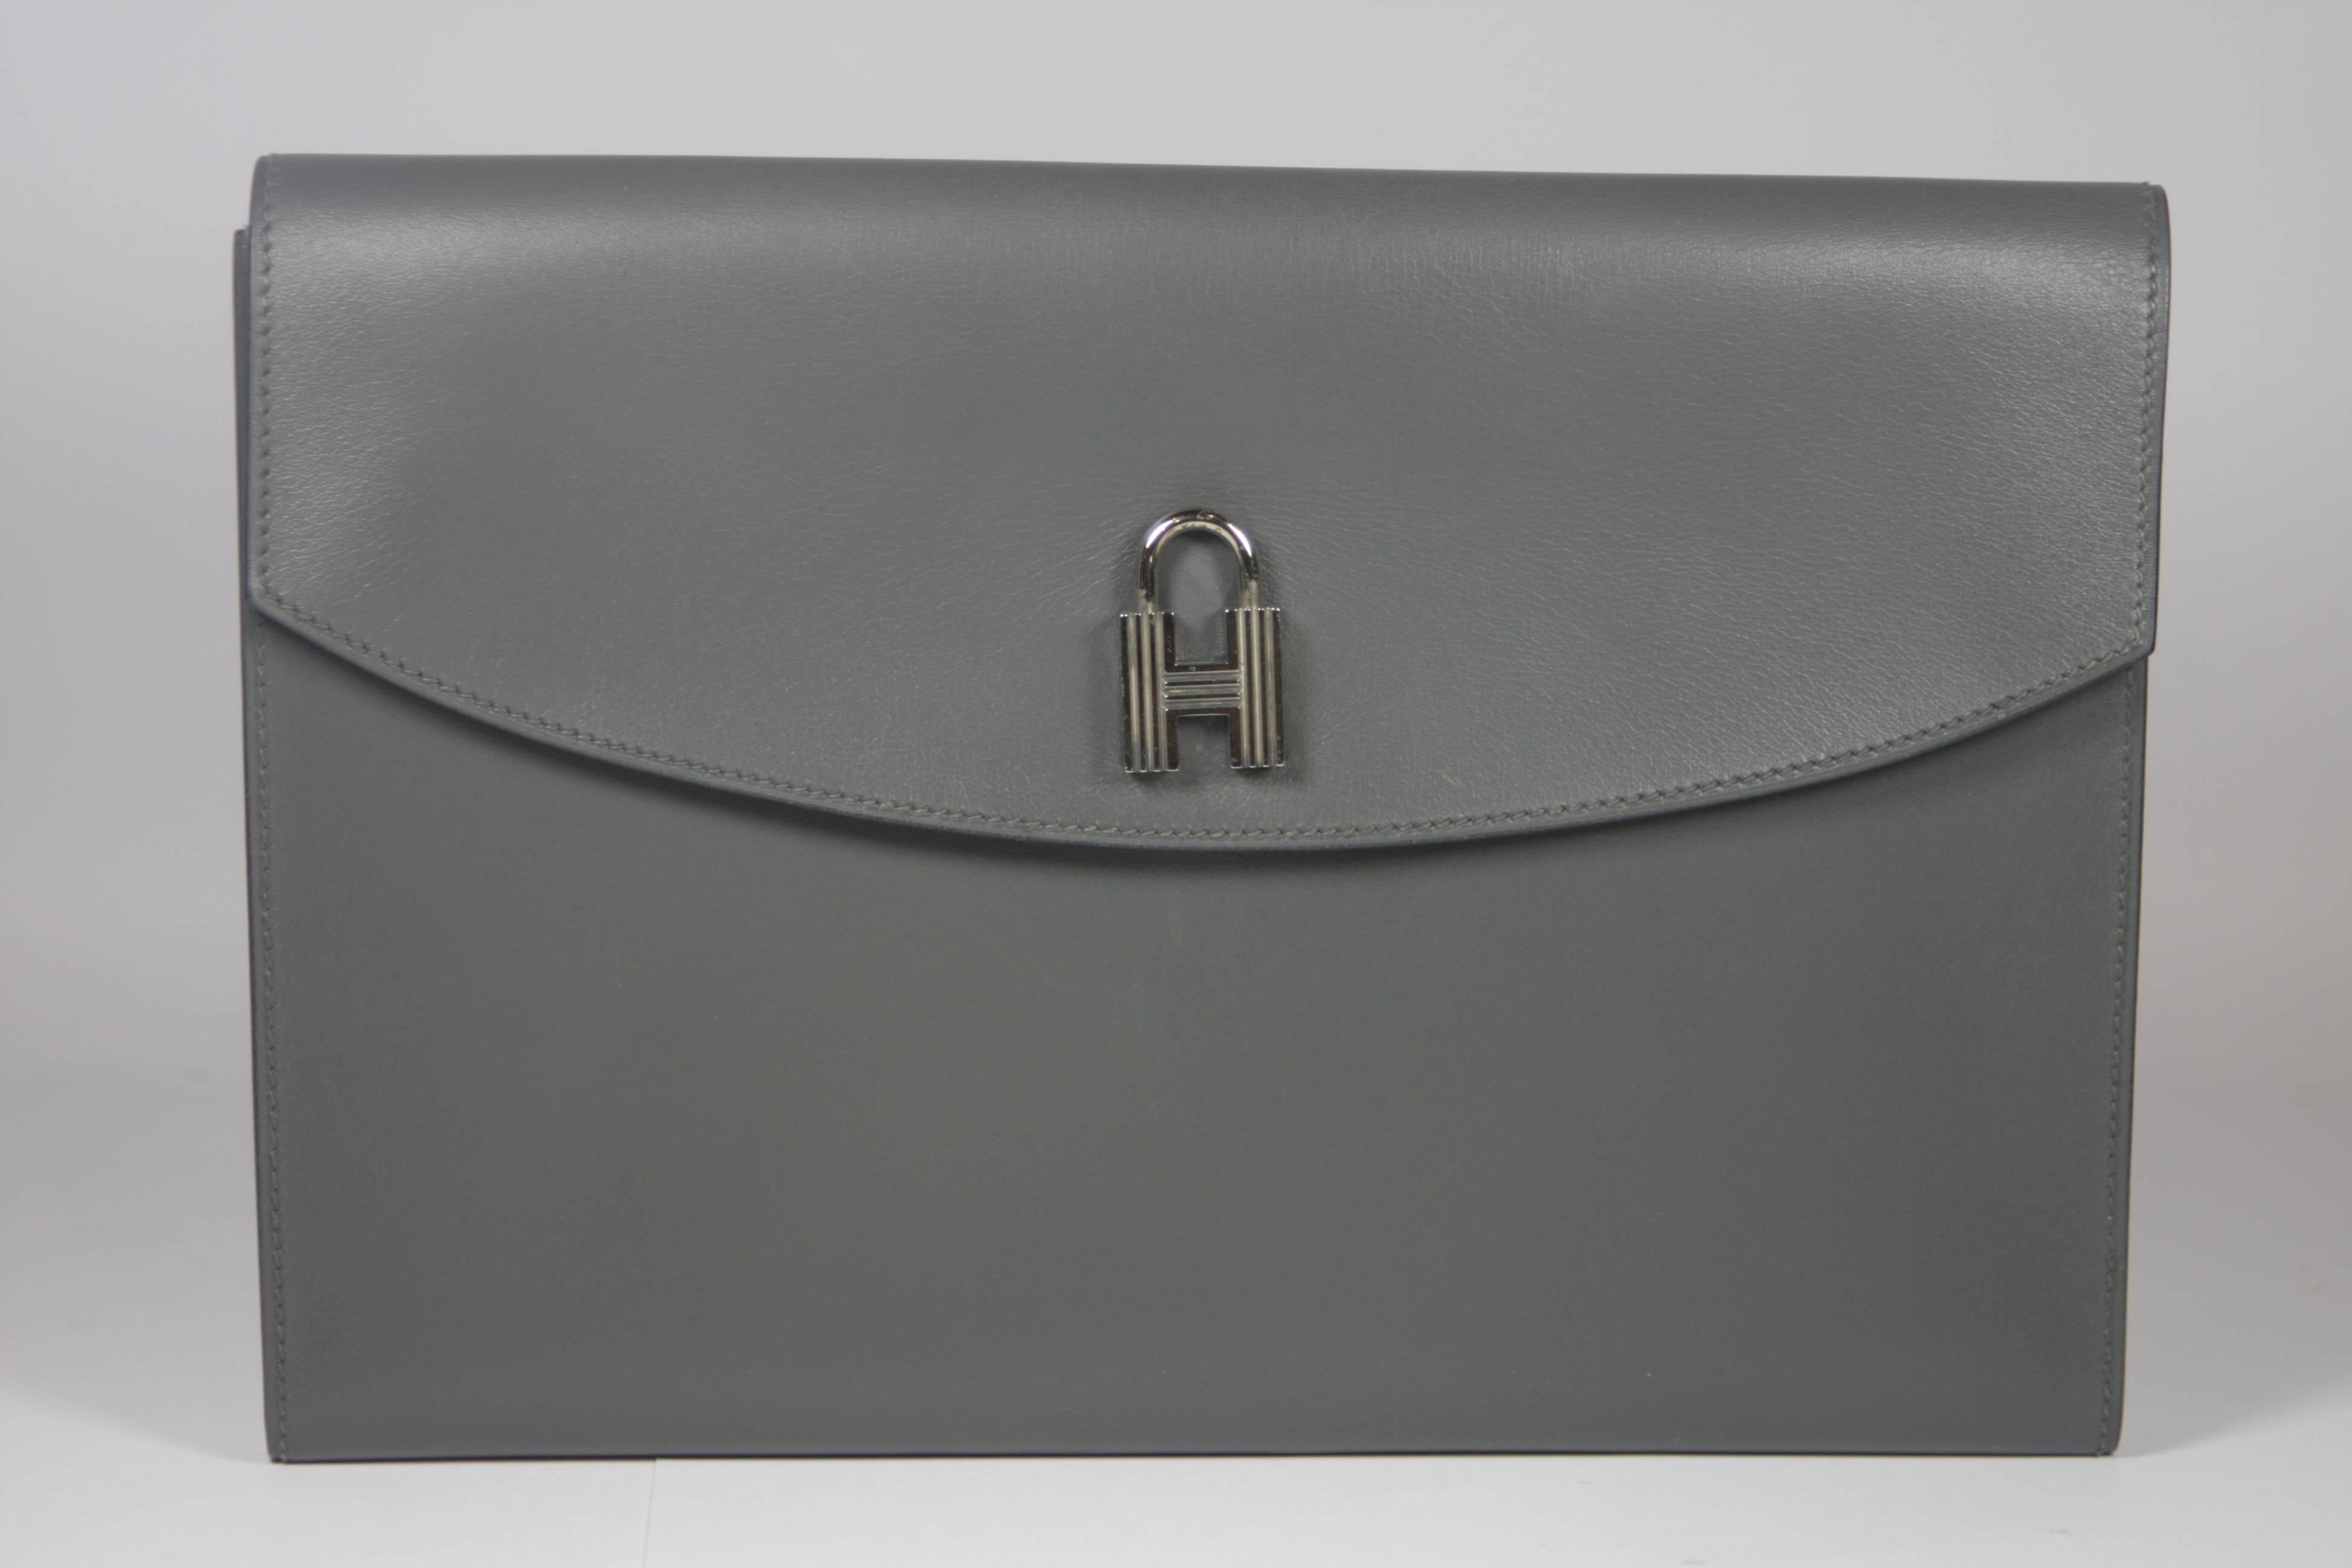 This Hermes clutch is composed of a stunning grey leather and features silver hardware. There is a silver mini non-functioning padlock detail on the exterior. In excellent rarely used vintage condition with Hermes sleeper bag.  Made in France.

 